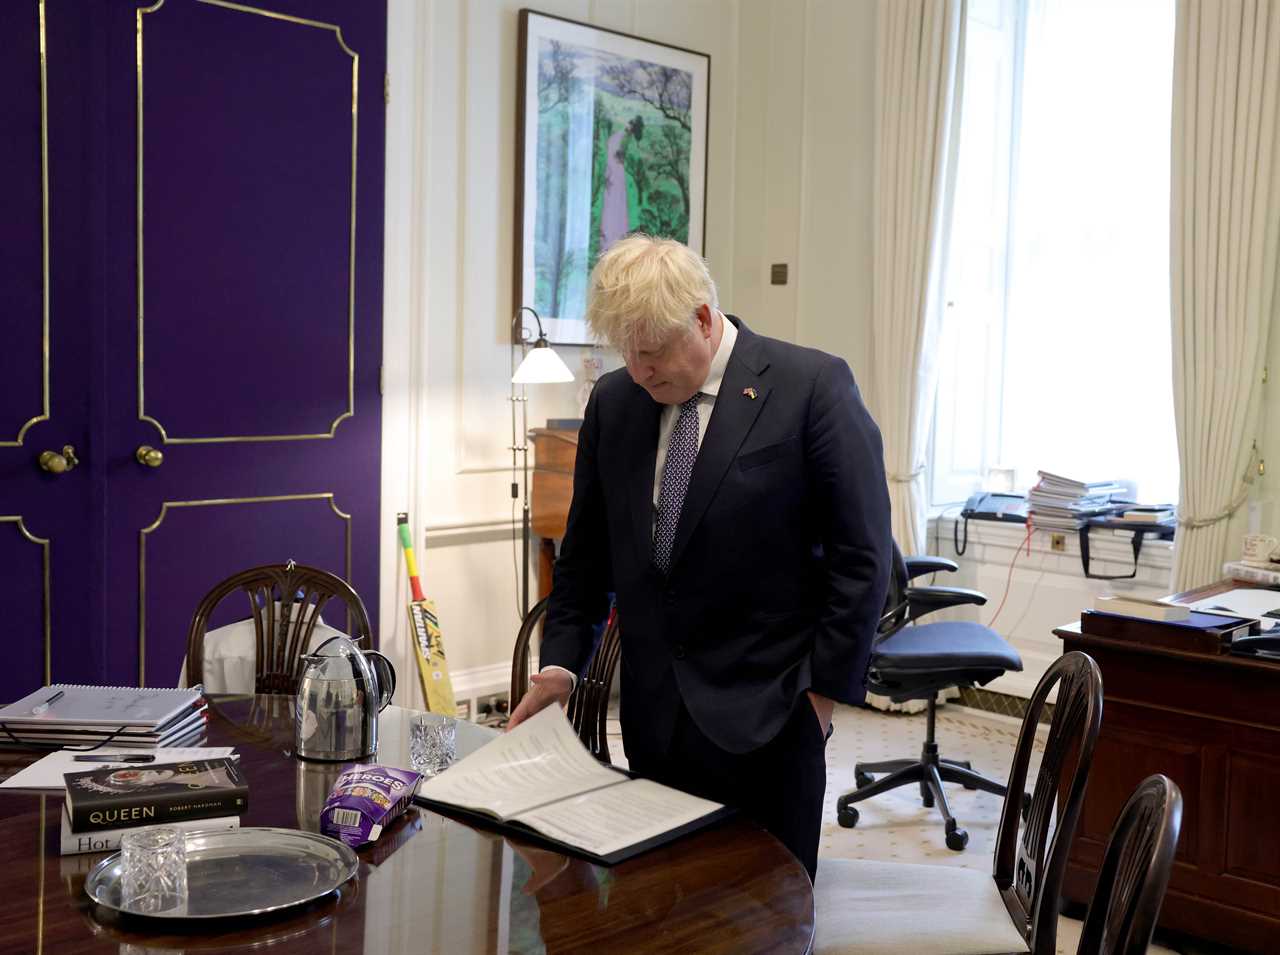 Inside the dramatic day Boris Johnson resigned, with tears, chocolate and more ‘sex pests’ lined up as ministers